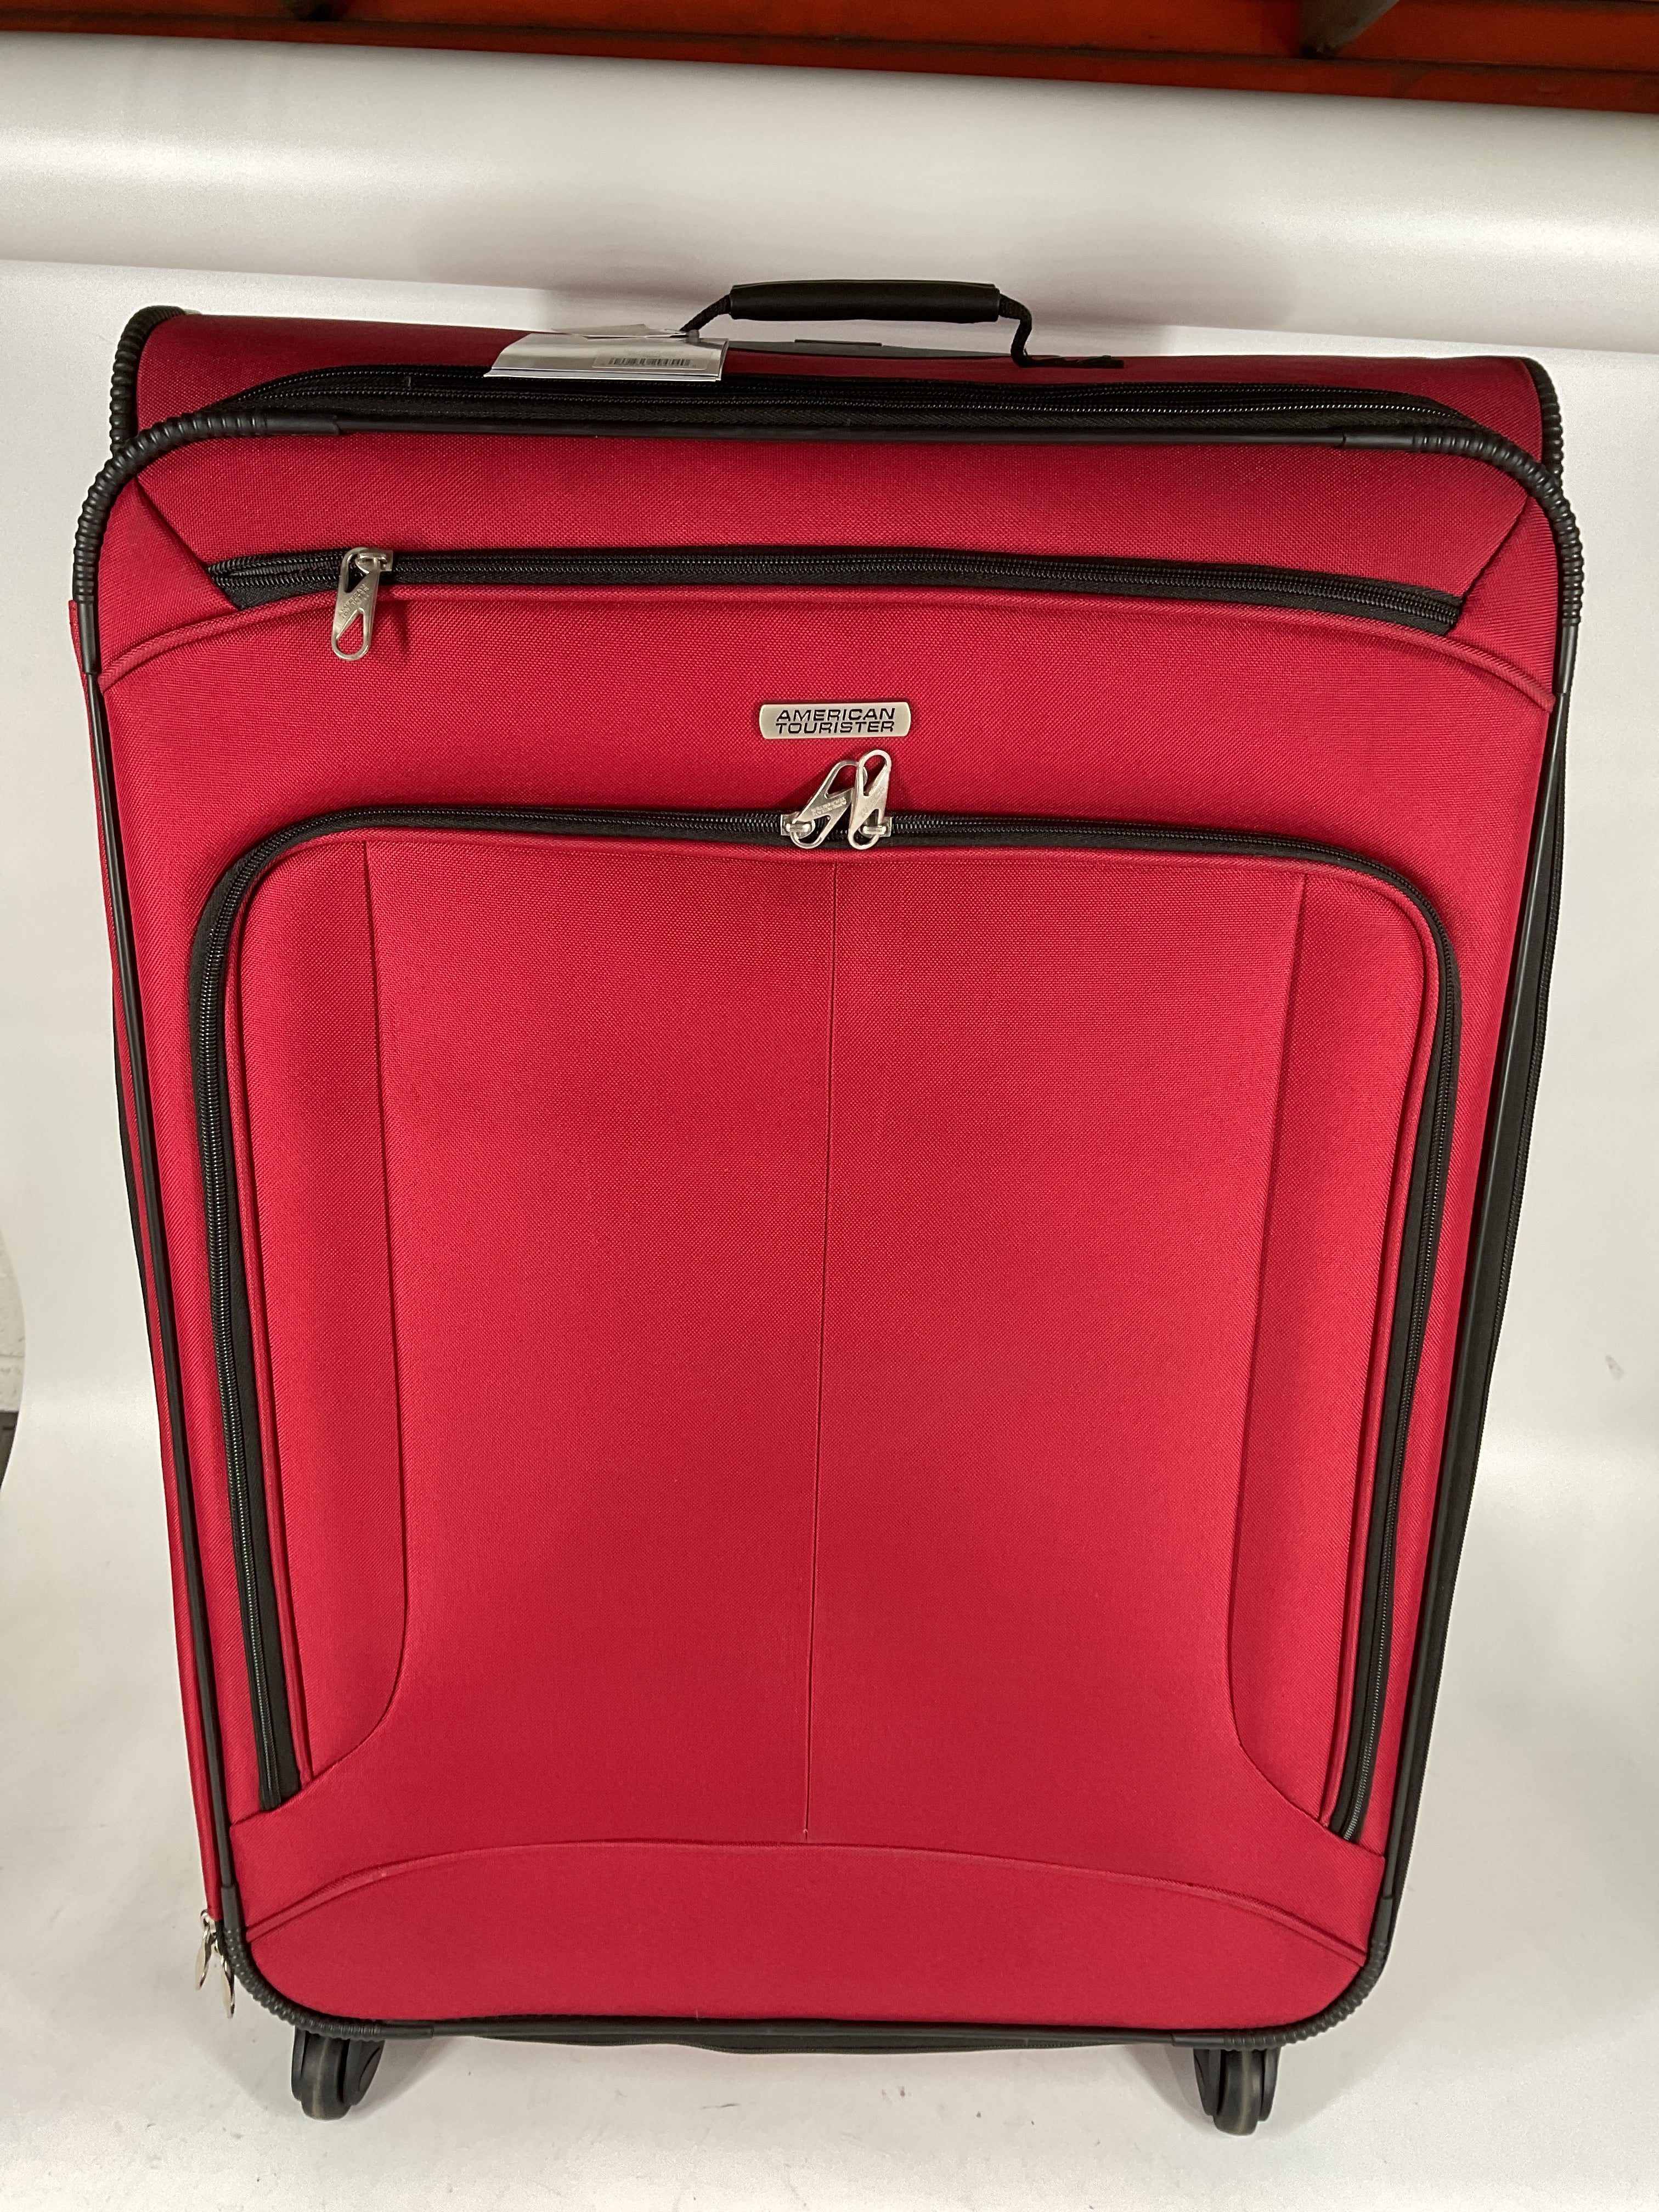 American Tourister Pop Max Softside Luggage with Spinner Wheels - Red/Checked-Large 29-Inch